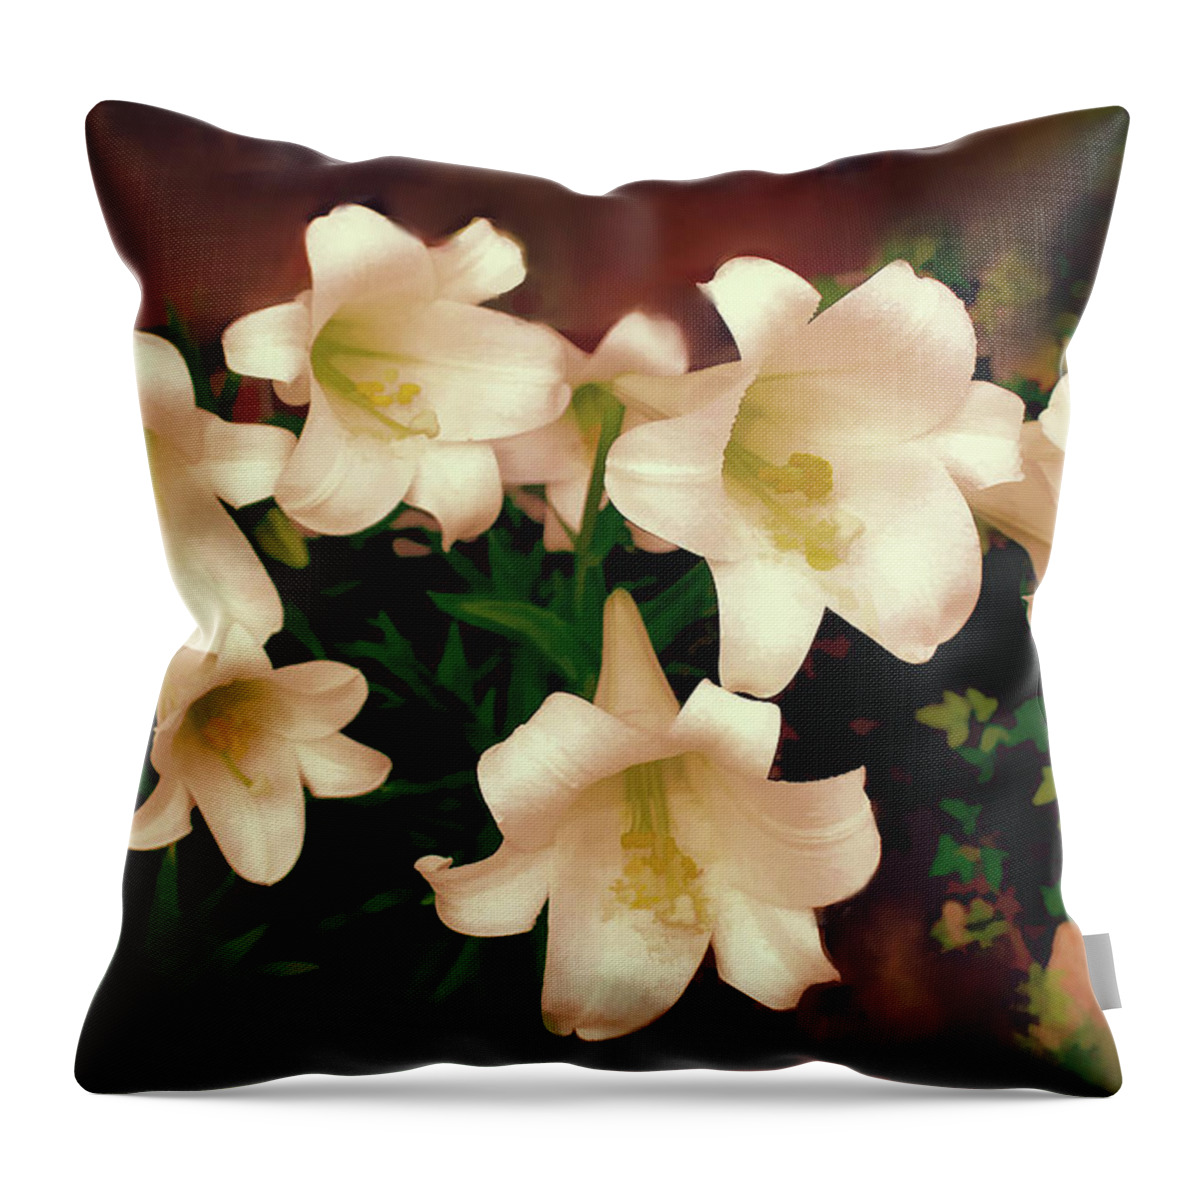 Lilies Throw Pillow featuring the photograph Lilies Aglow by Bonnie Willis